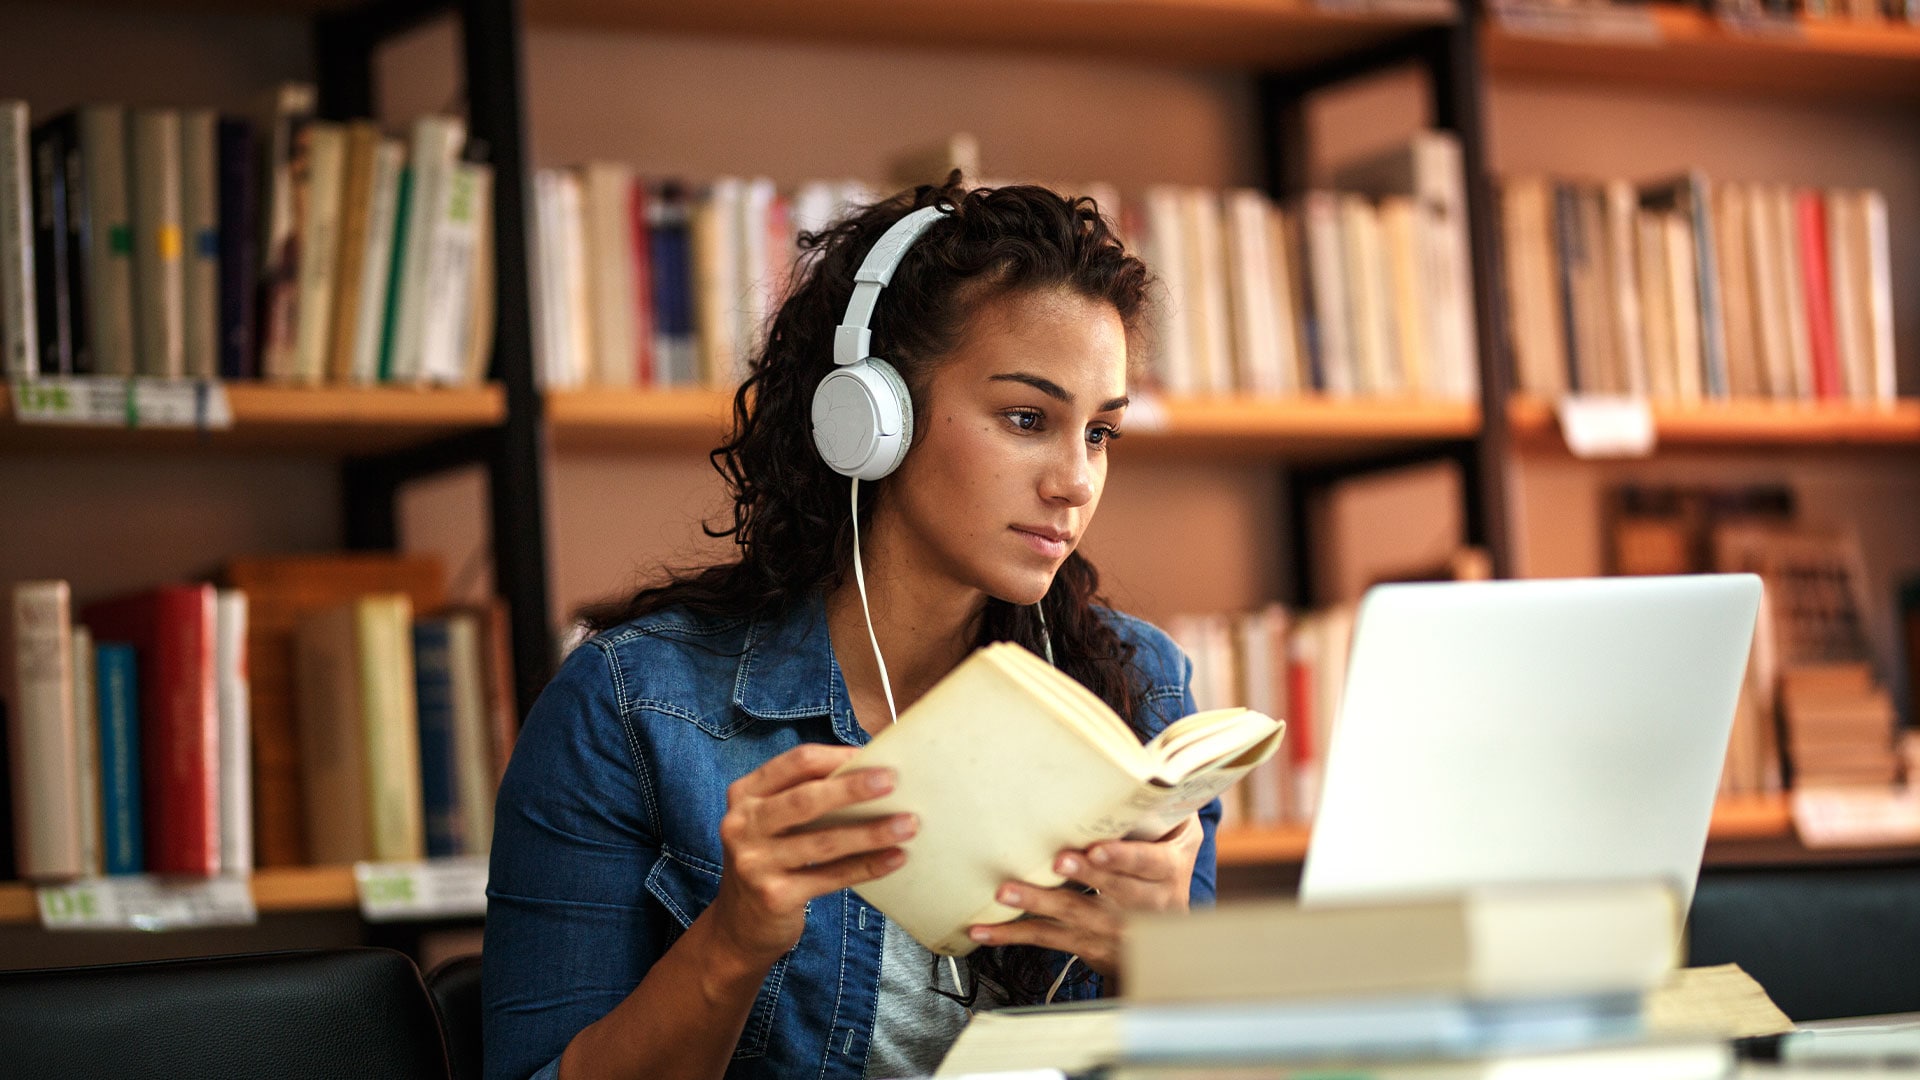 Image of girl with headphones taking a test